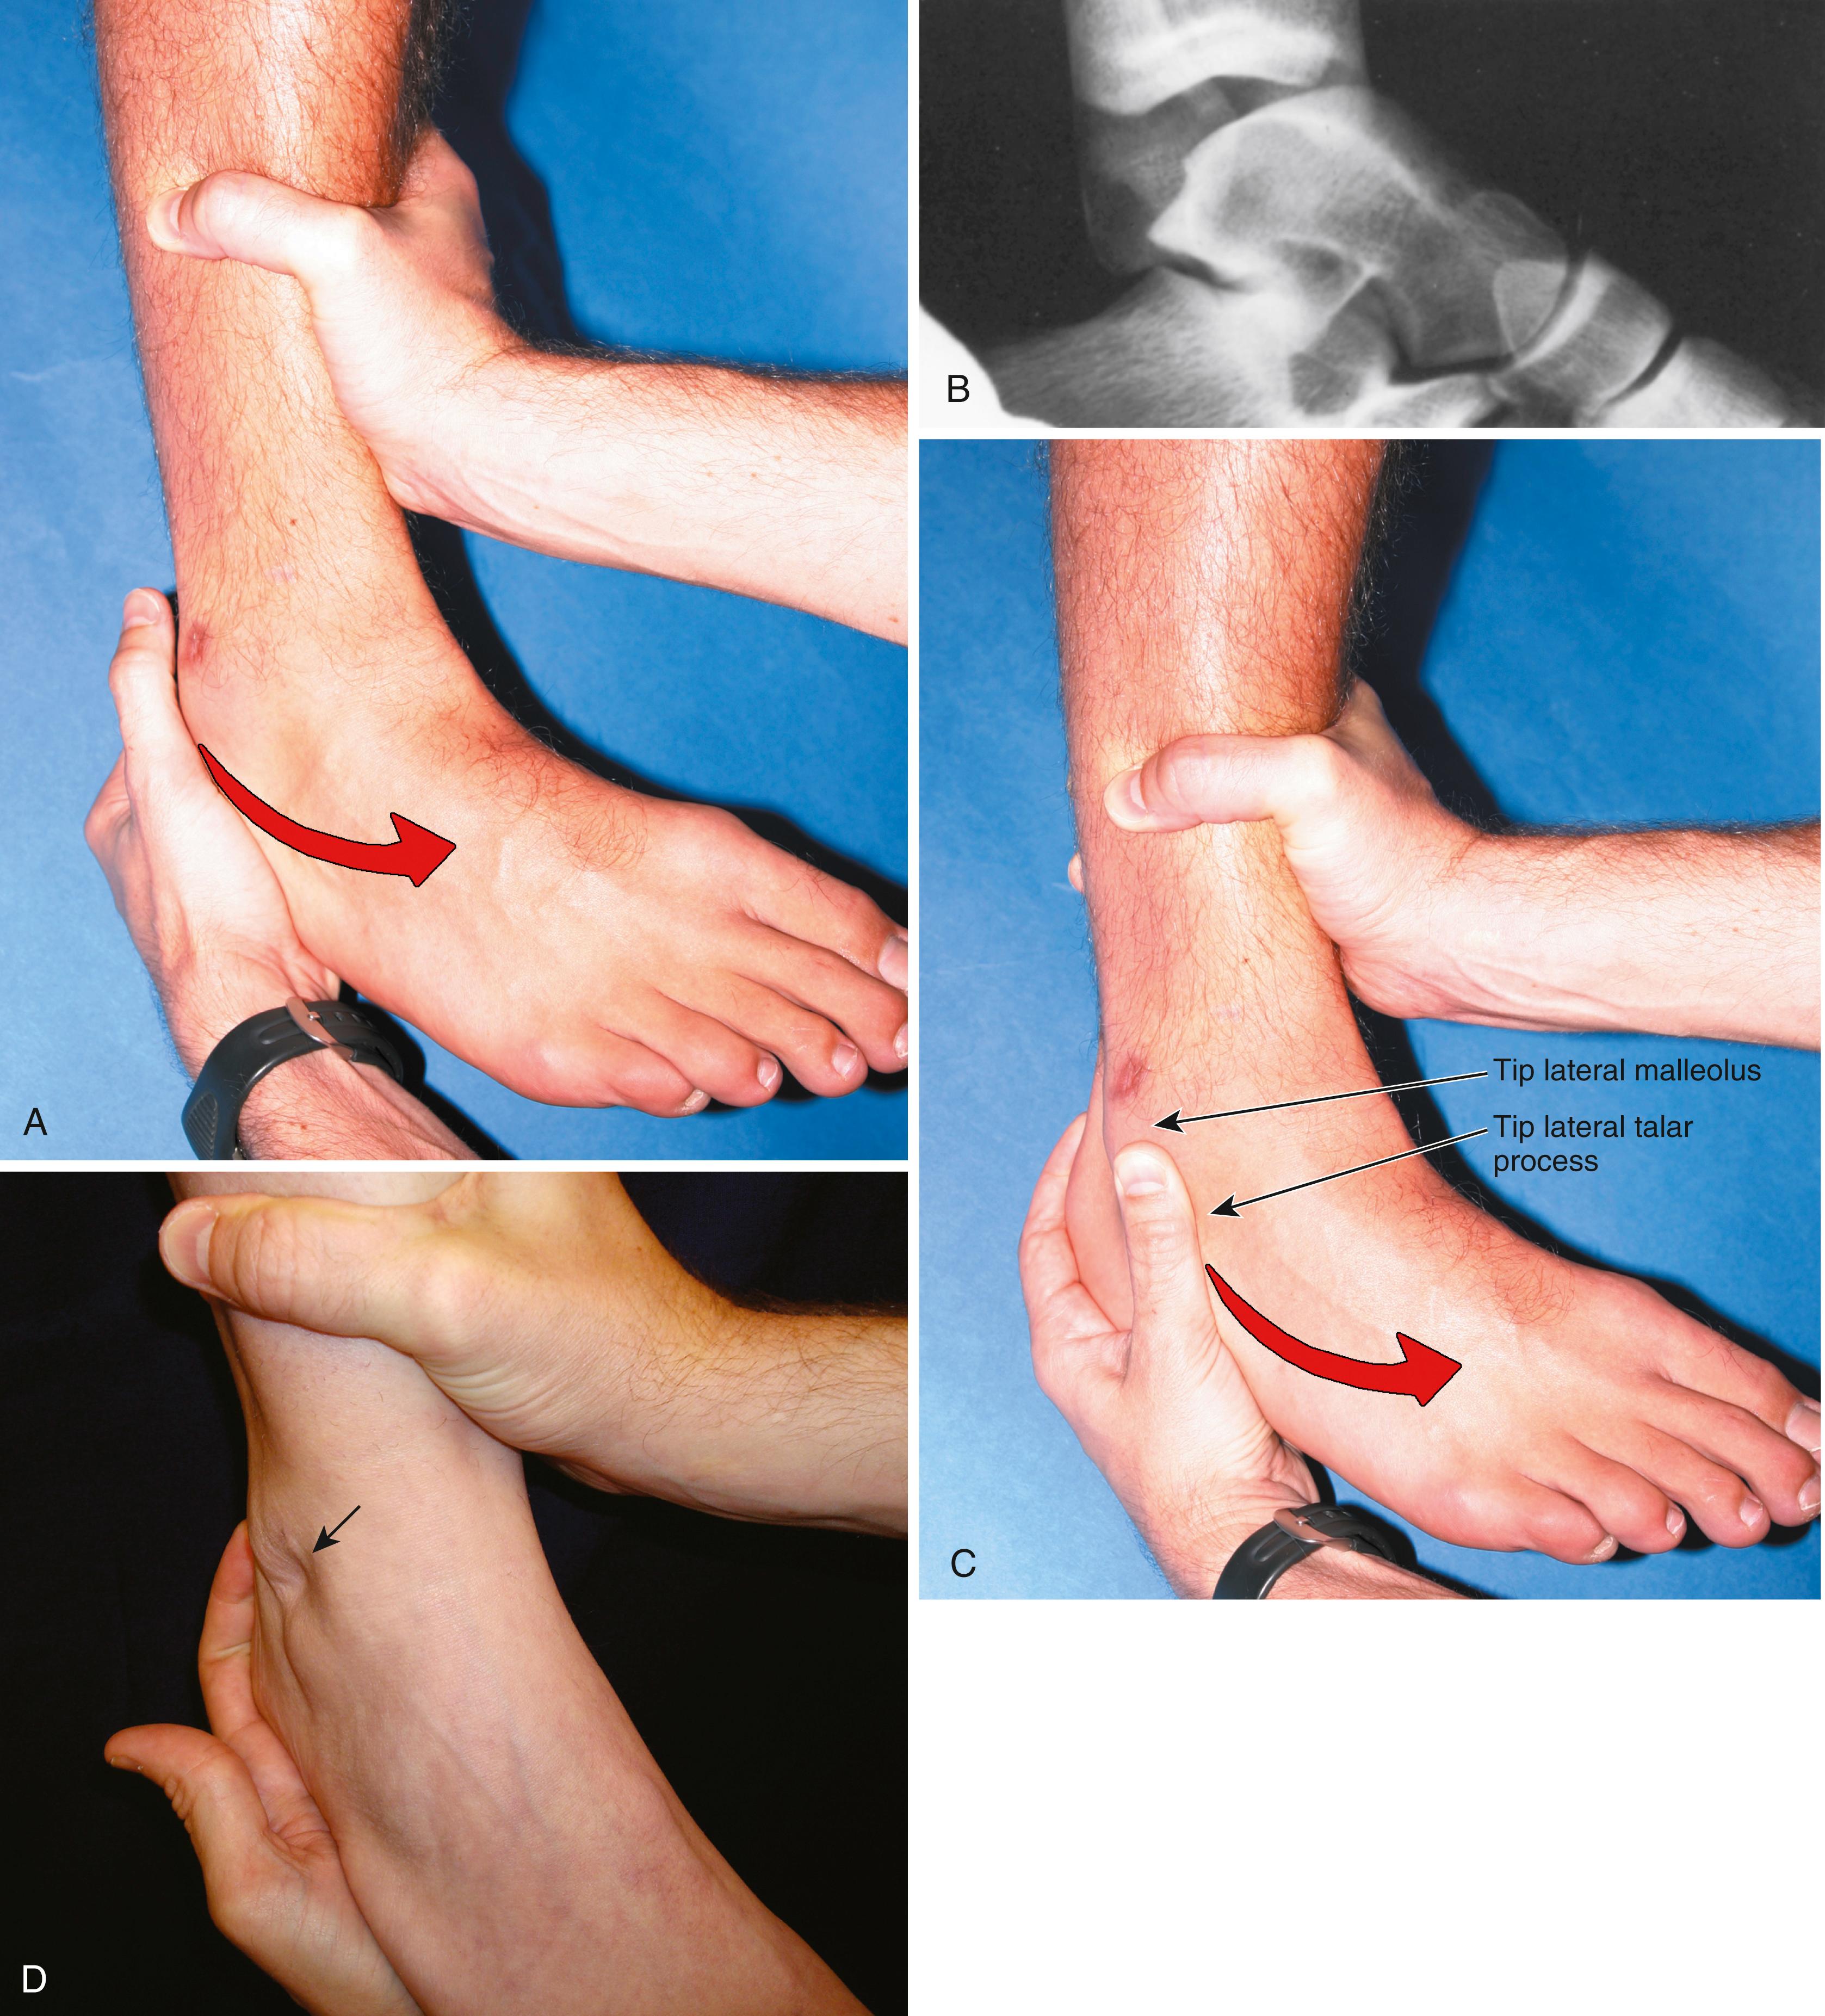 FIGURE 90.5, A, Demonstration of anterior drawer sign positioning for radiograph. B, Positive anterior drawer test. C, Clinical demonstration of anterior draw sign. D, Sulcus, or suction, sign (arrow) indicating disruption of the anterior talofibular ligament.